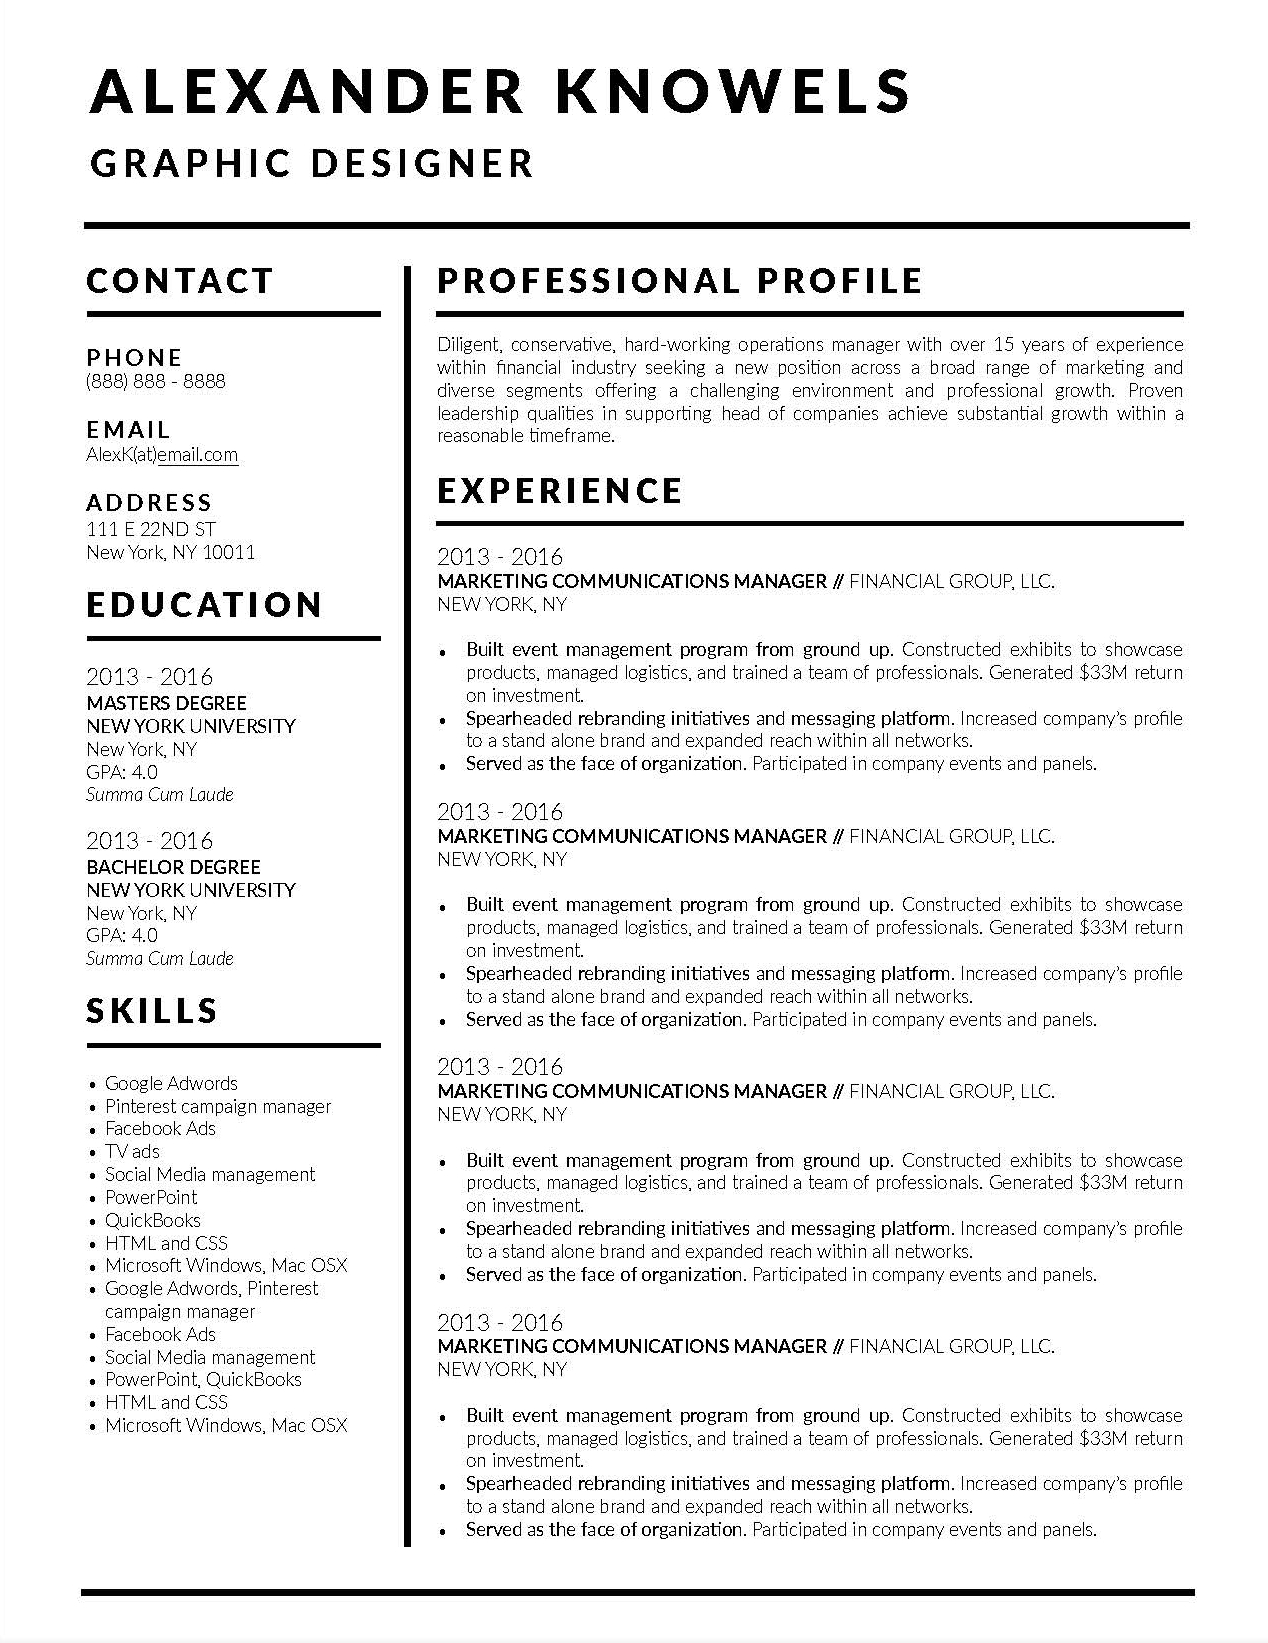 Job Winning Resume Templates For Microsoft Word & Apple Pages In Hours Of Operation Template Microsoft Word